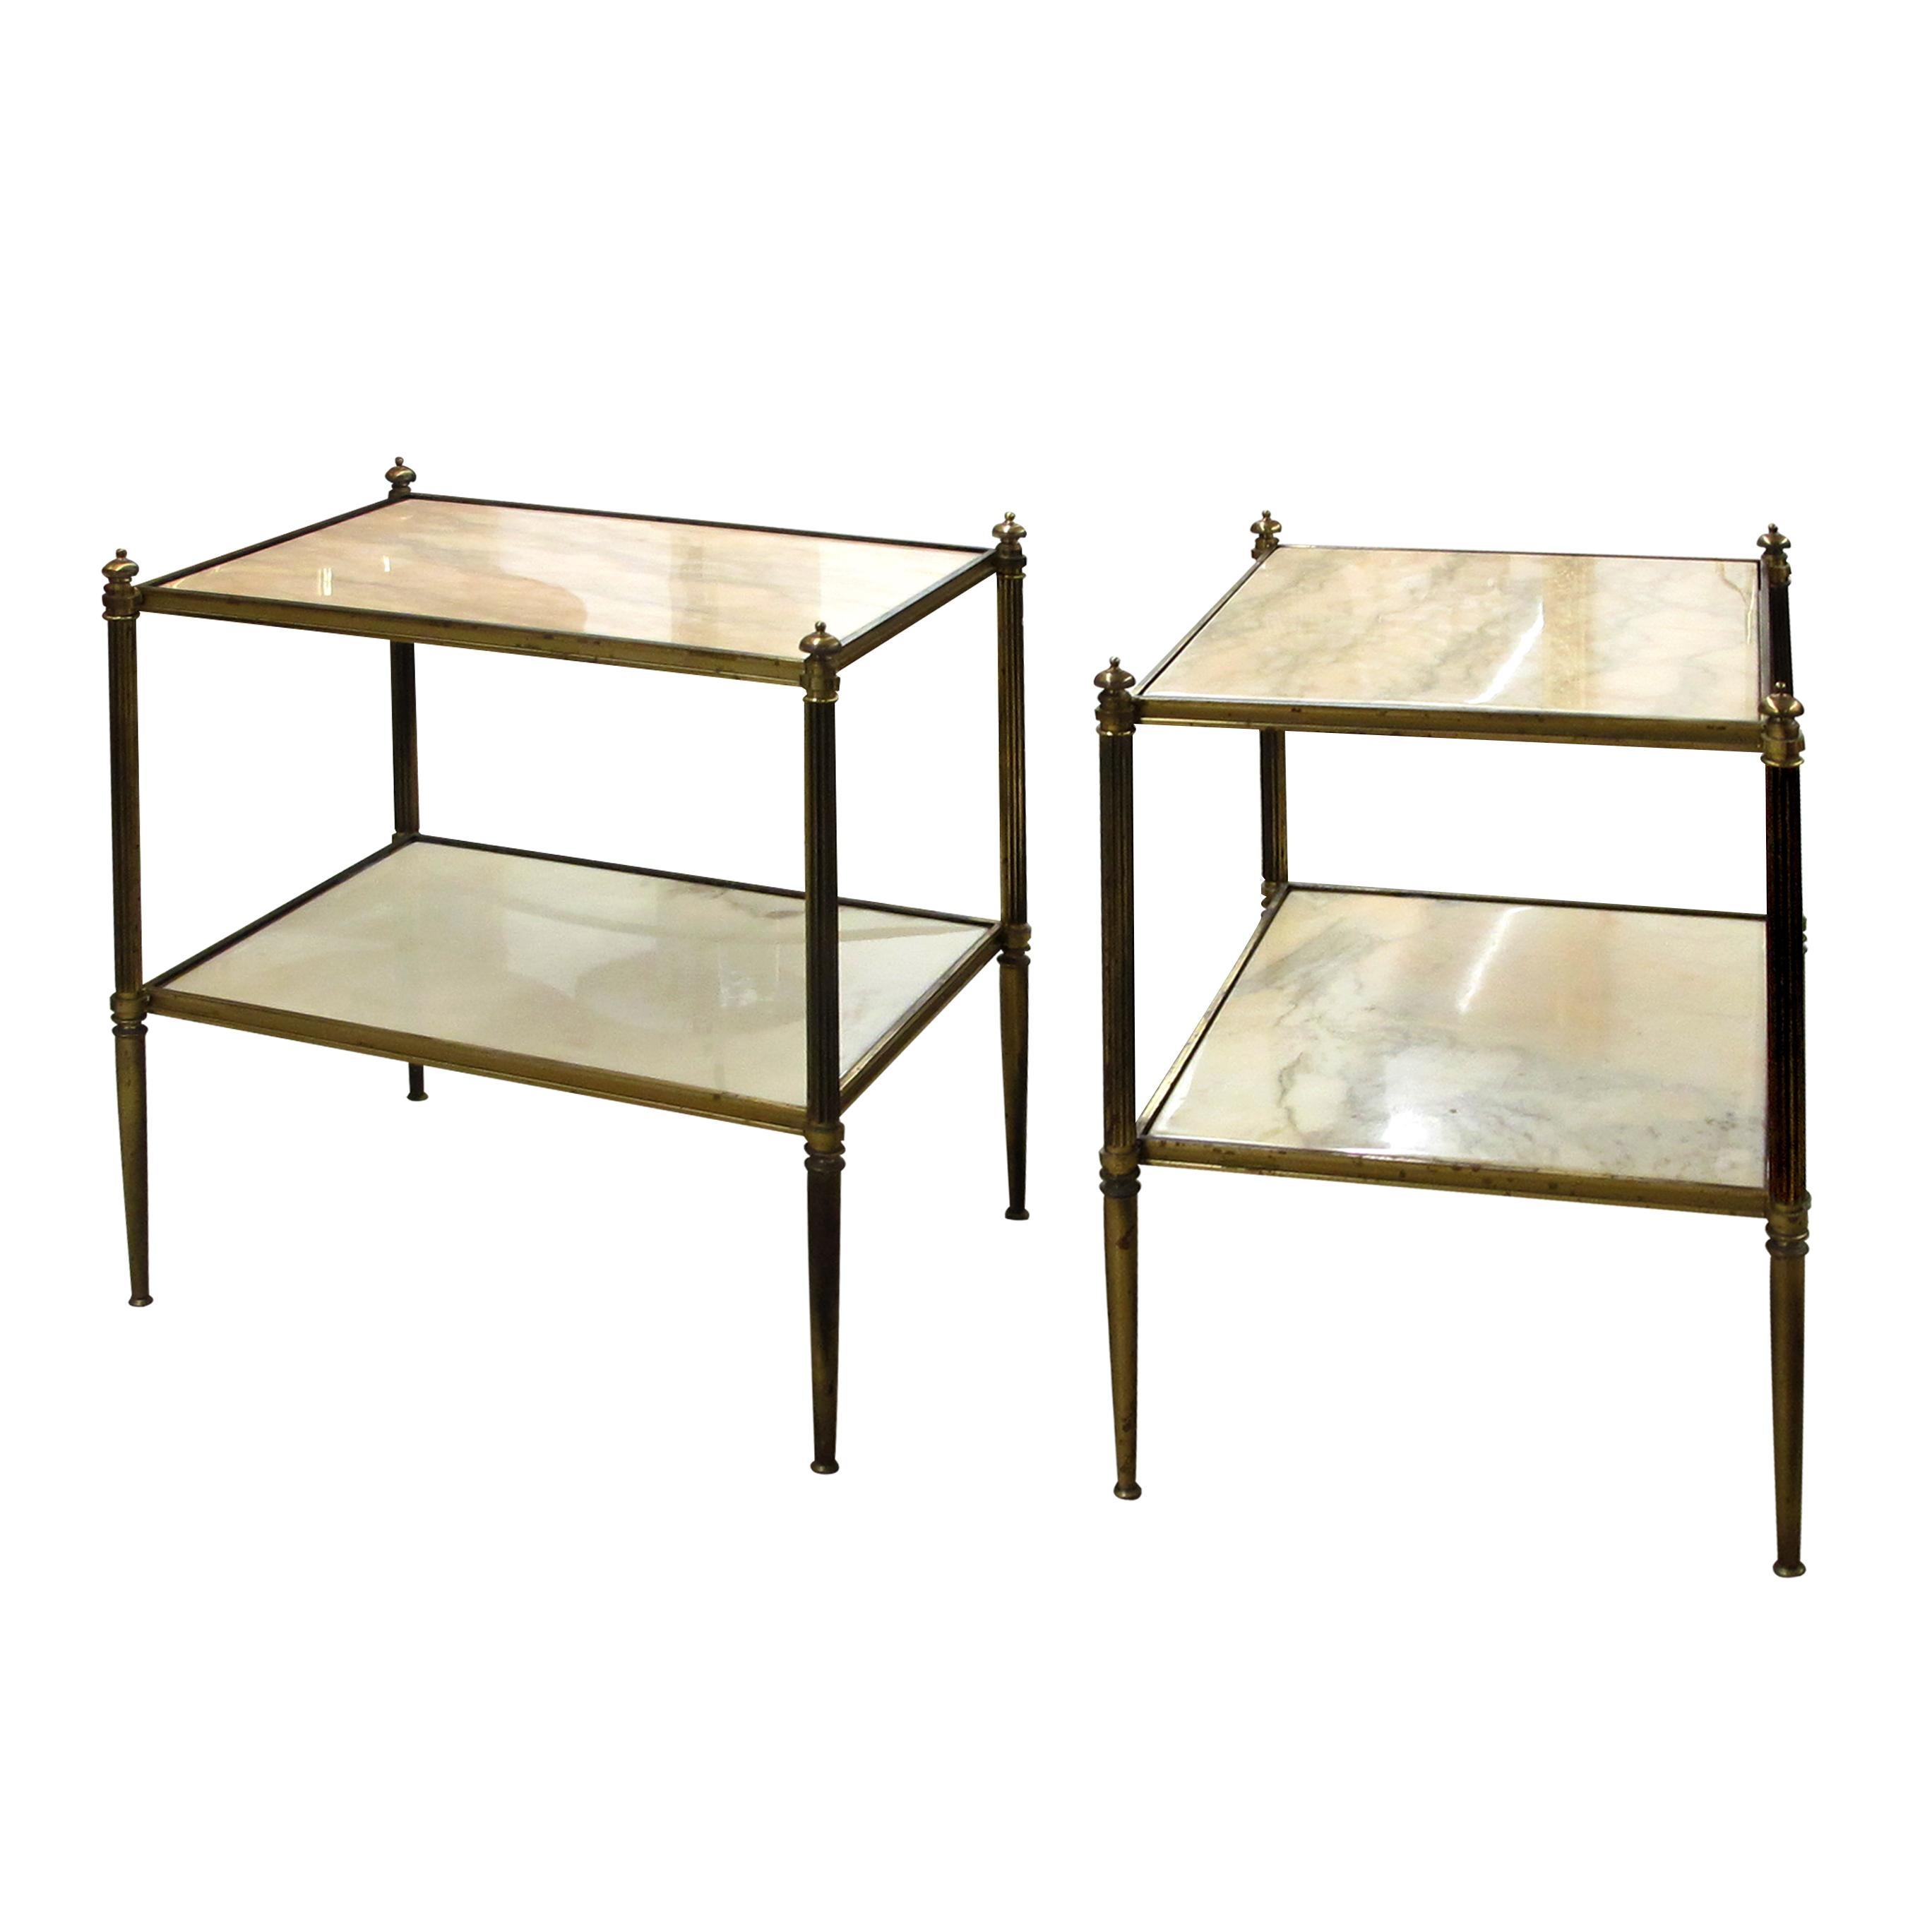 The defining feature of these French side tables lies in their architectural brass frames in the style of Maison Bagues aesthetic that flourished during the 1960s. The two-tier design allows for both form and function to coexist harmoniously. The